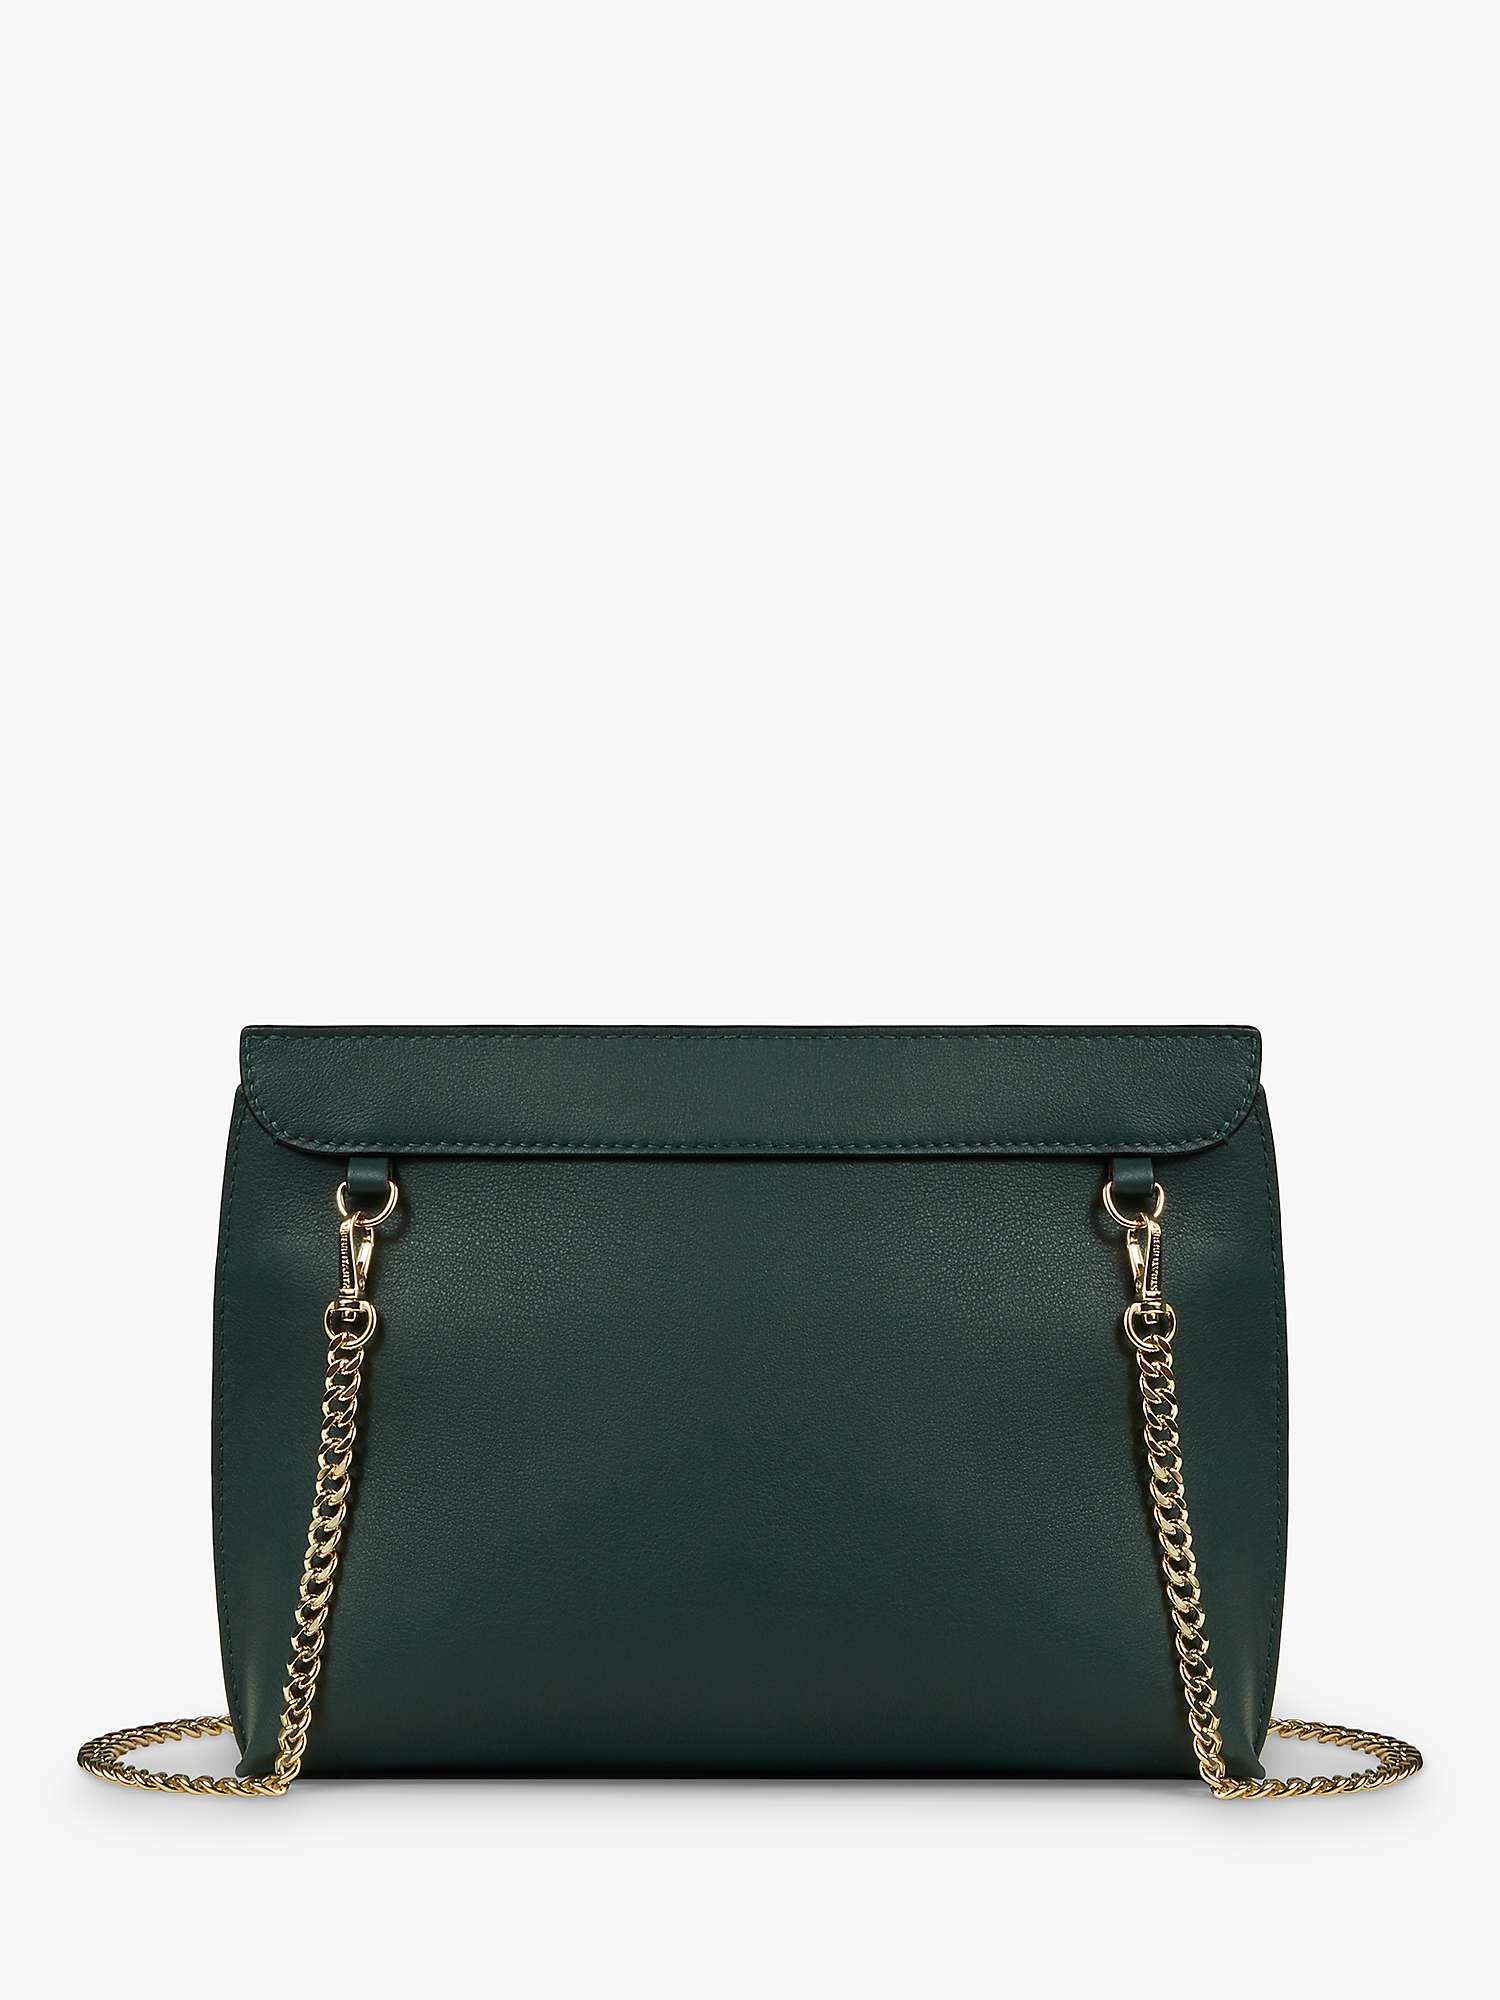 Strathberry Stylist Leather Clutch Bag, Bottle Green at John Lewis ...